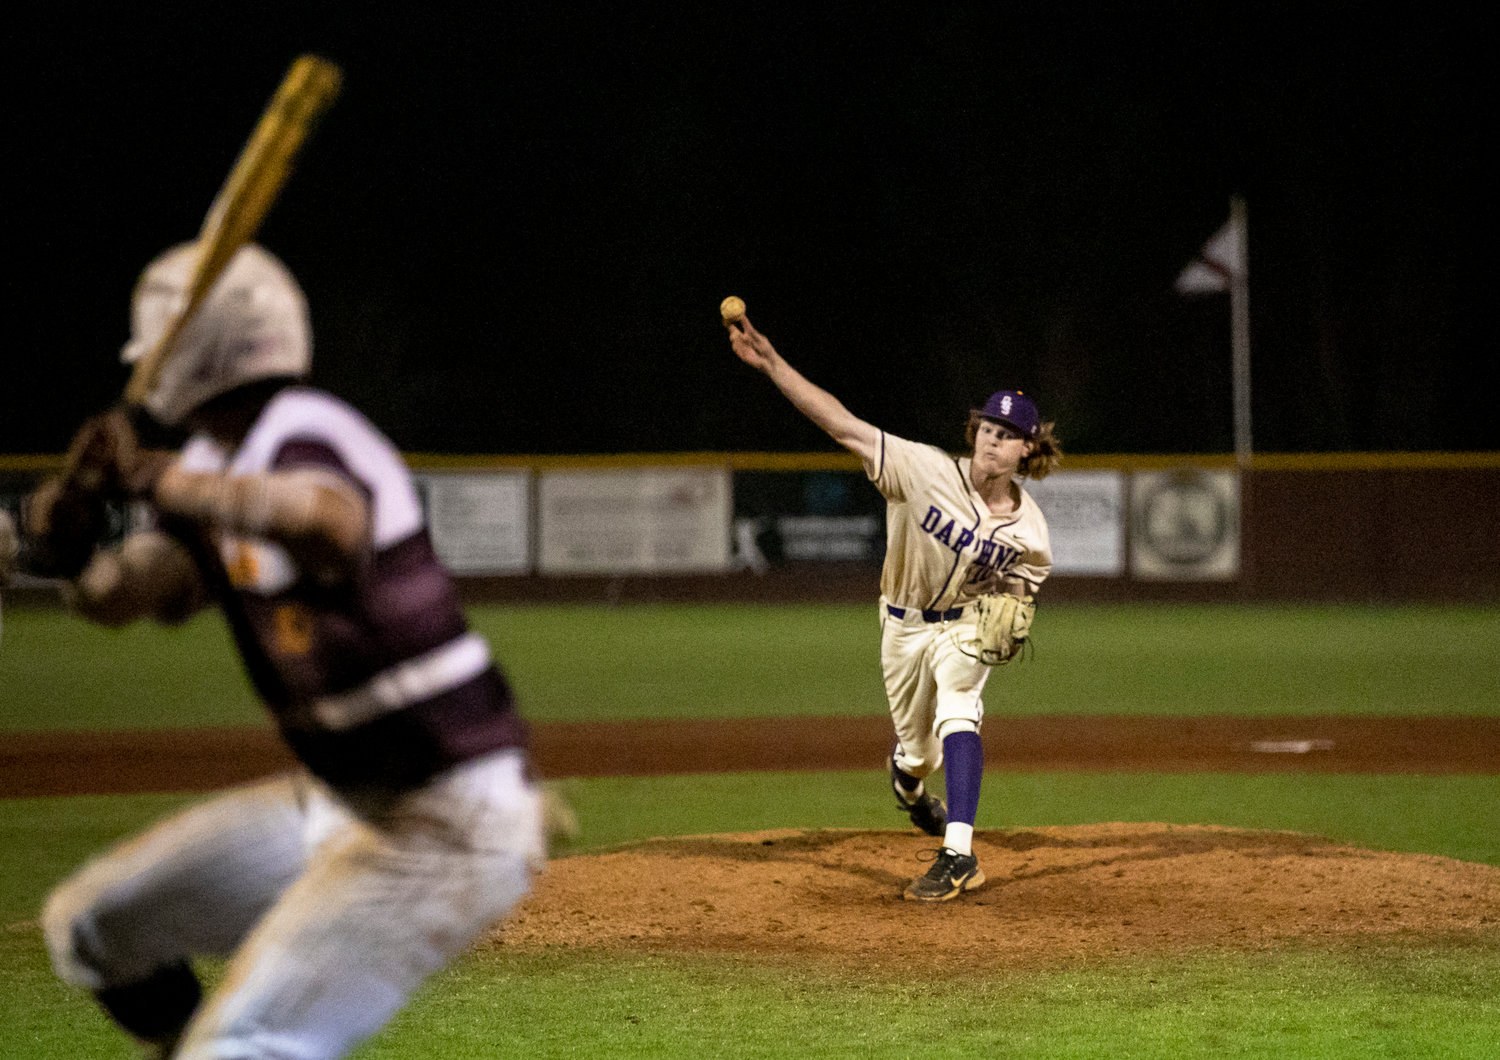 Daphne junior Owen Miller releases a pitch during the Trojans’ final game of the PBR South Alabama Showdown against the host Robertsdale Golden Bears Saturday, Feb. 26.